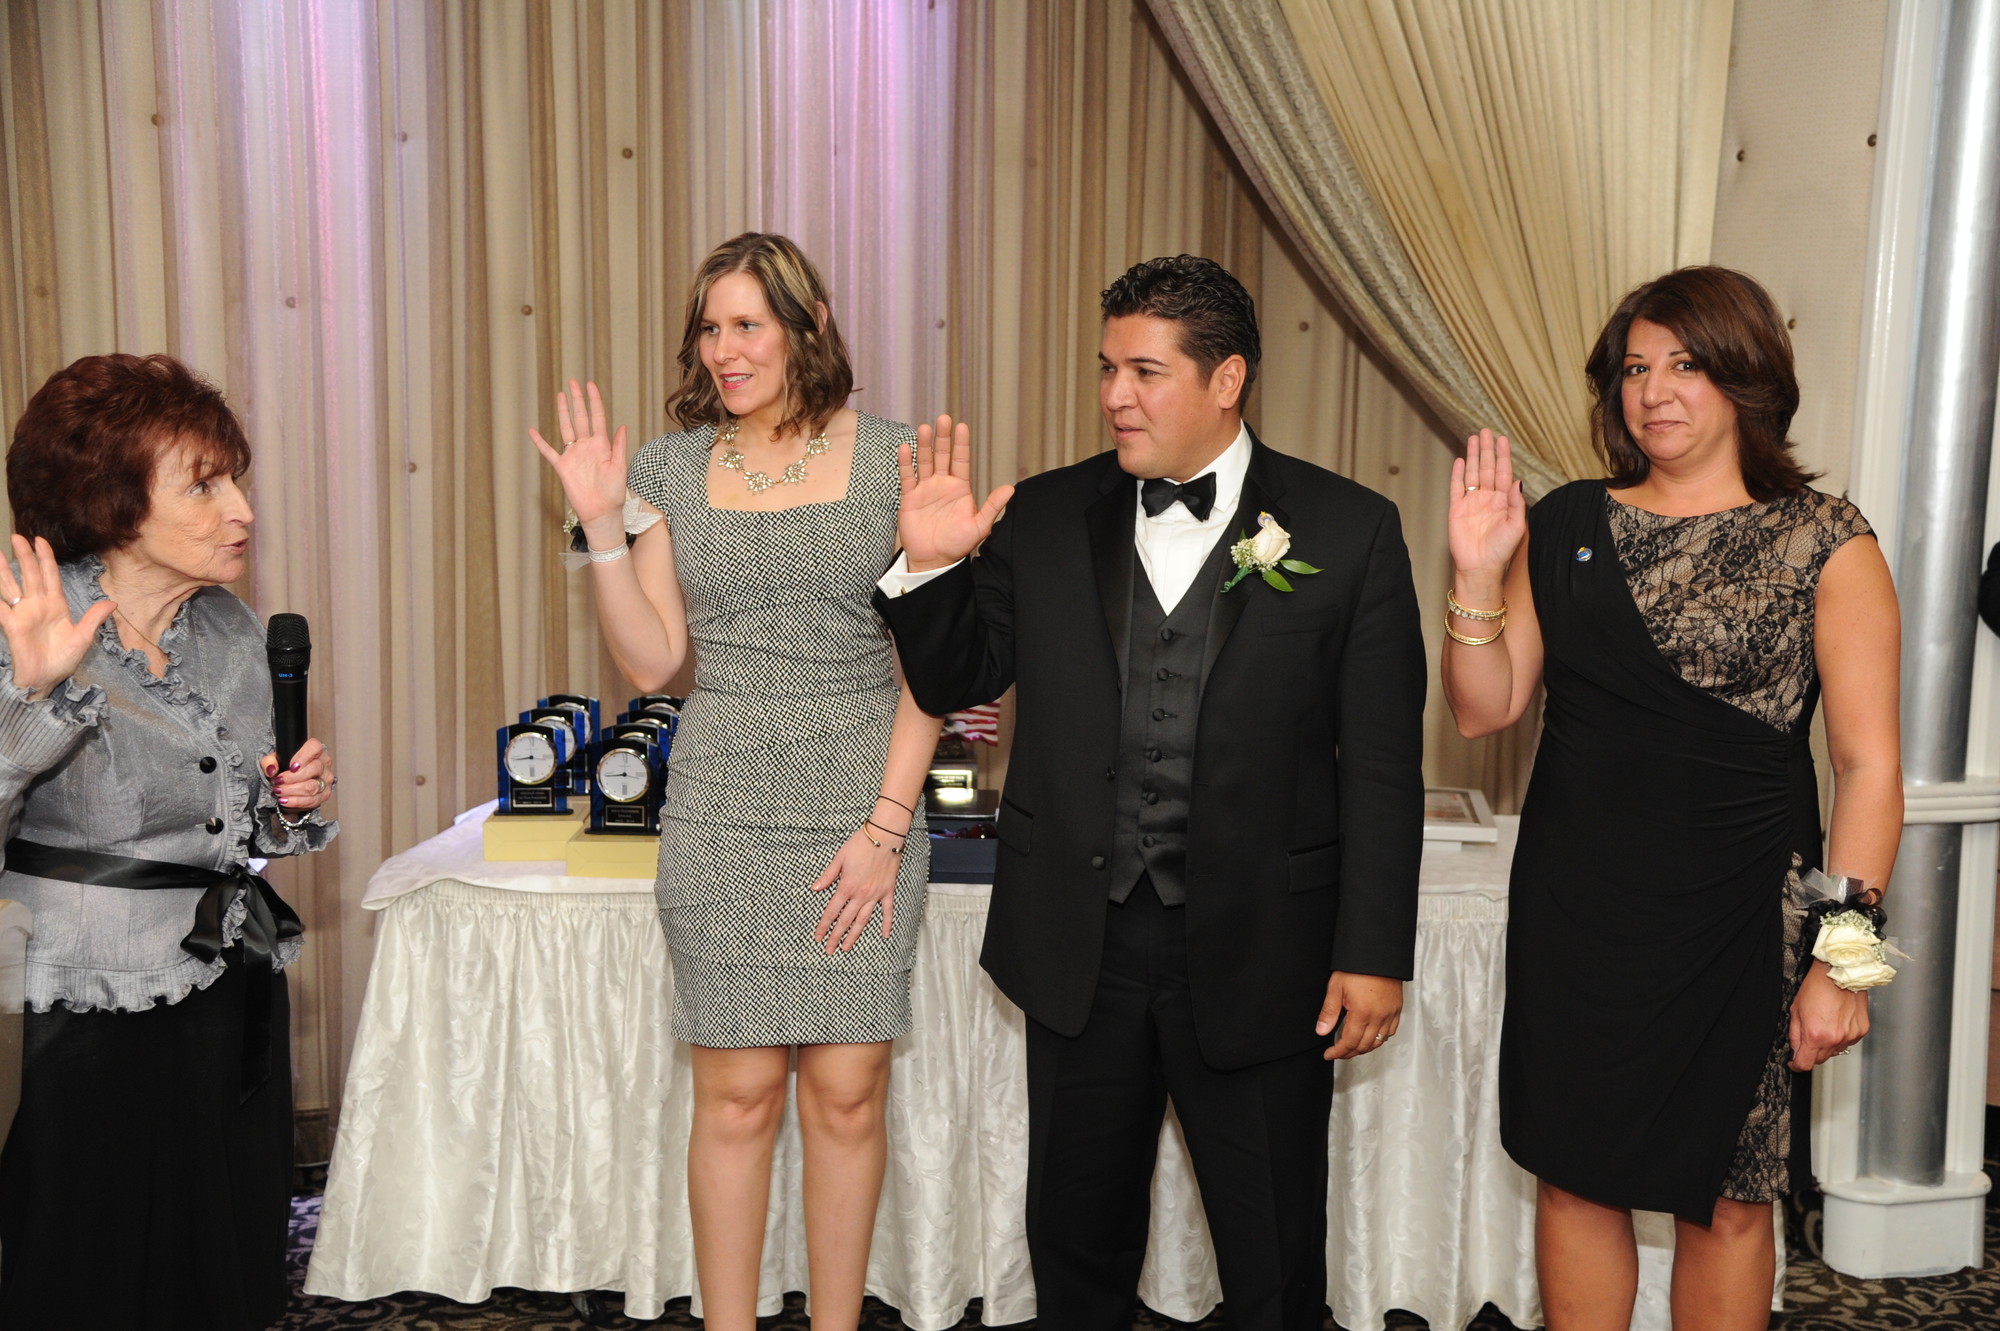 Lindsay Gallagher, William Miranda and Rosemary Basmajian were sworn in as officers by County Legislator Norma Gonsalves.